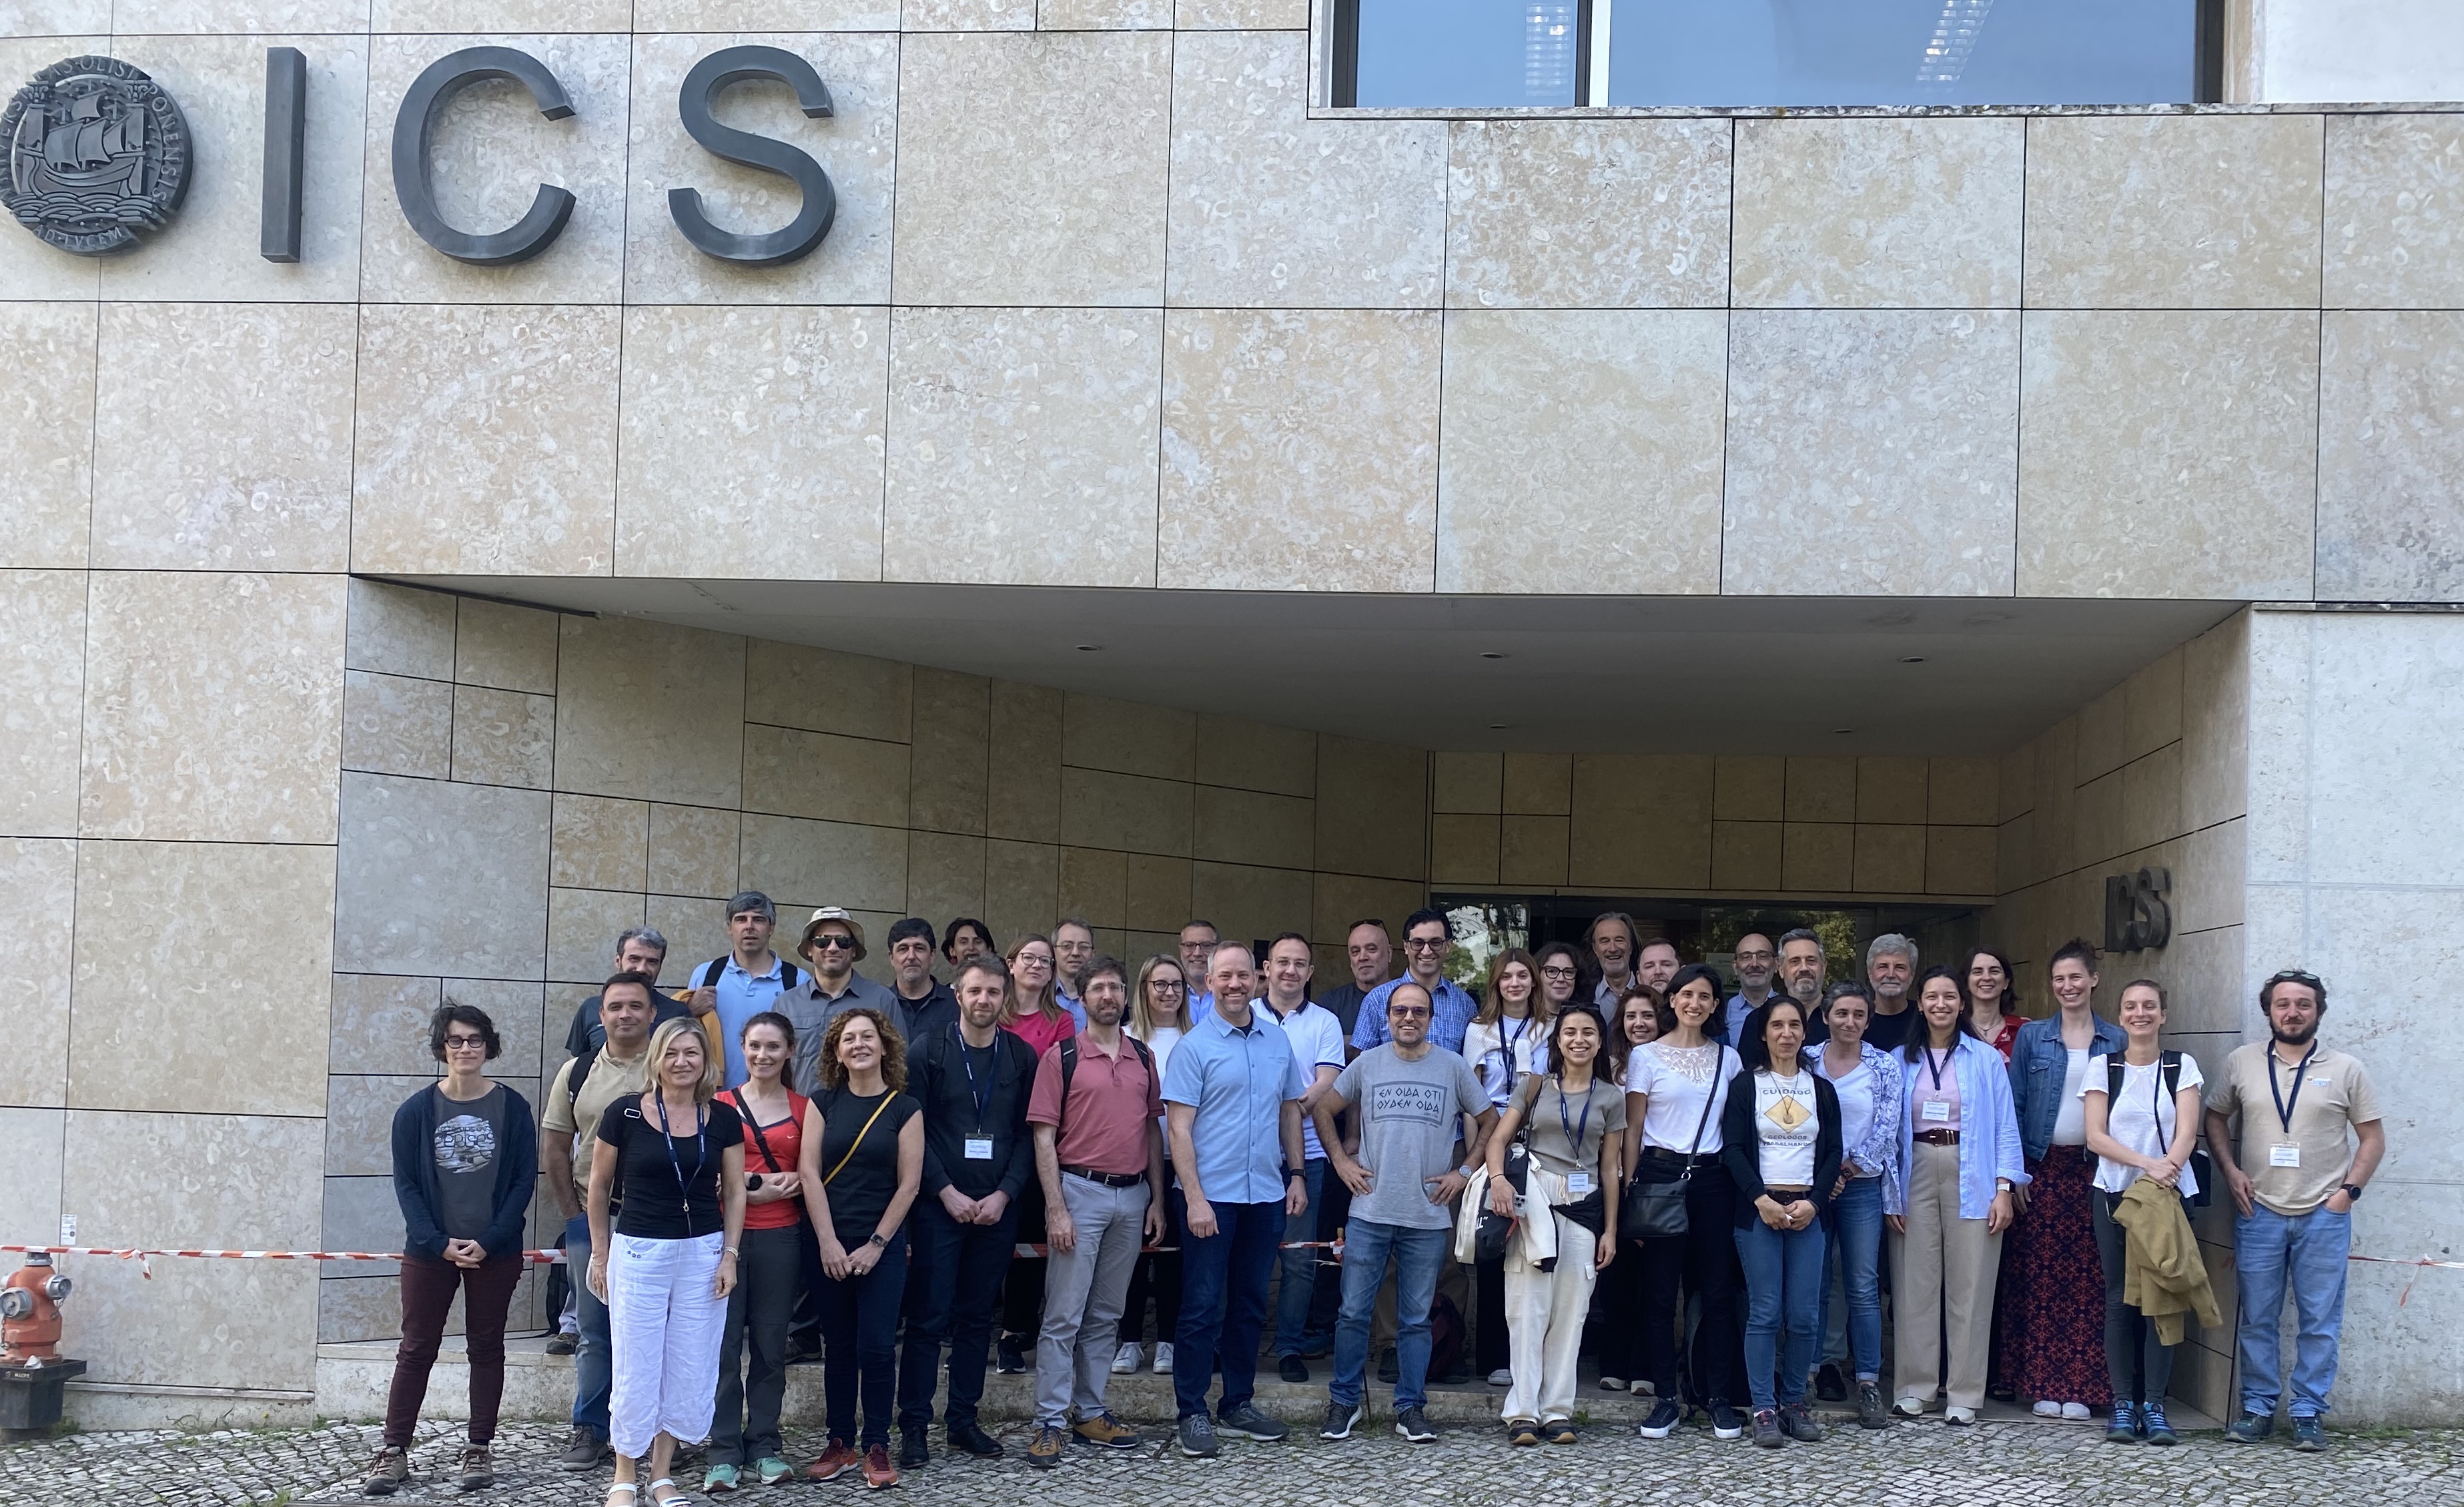 Group photo of partners outside ICS building